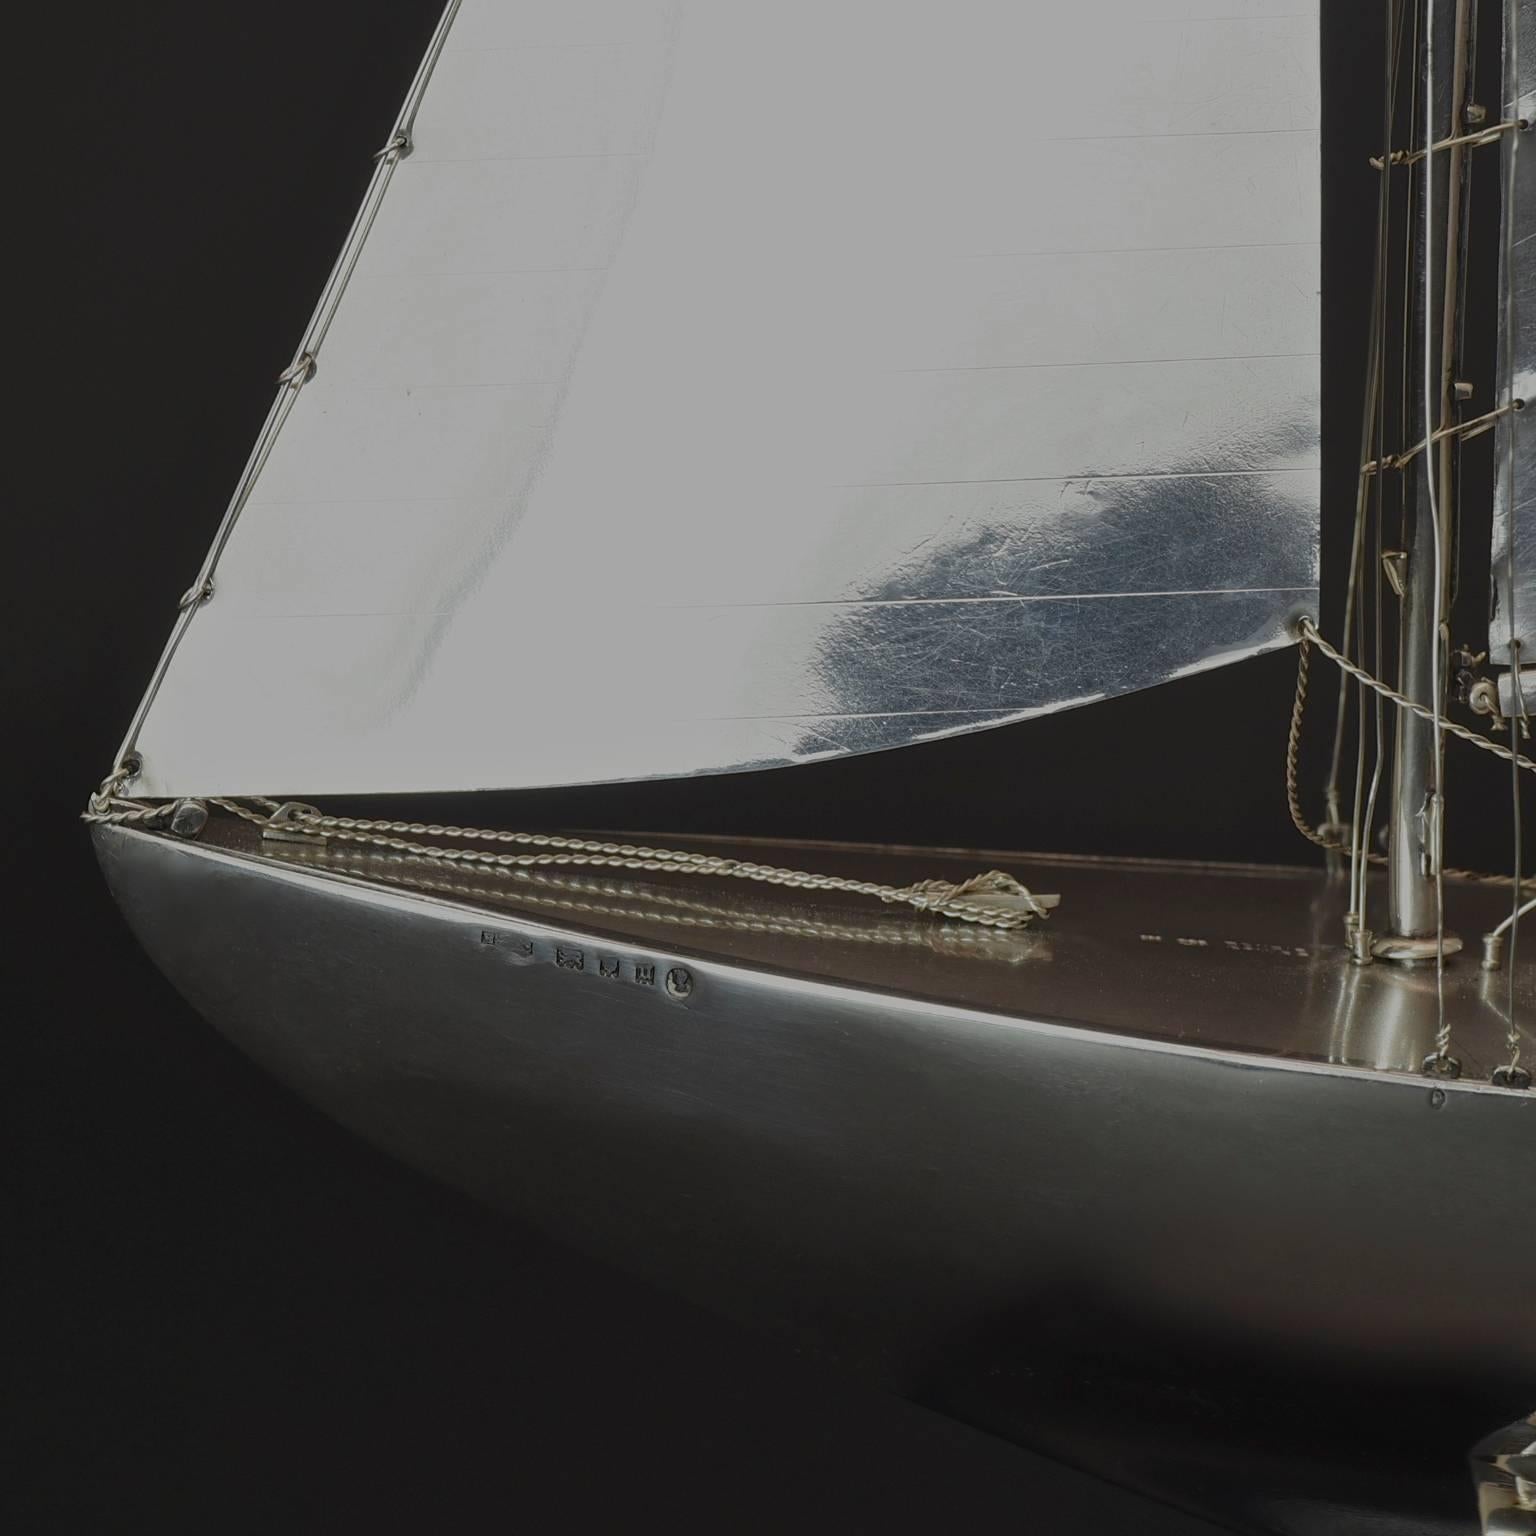 Benzie's Sterling Silver Model Yacht 2